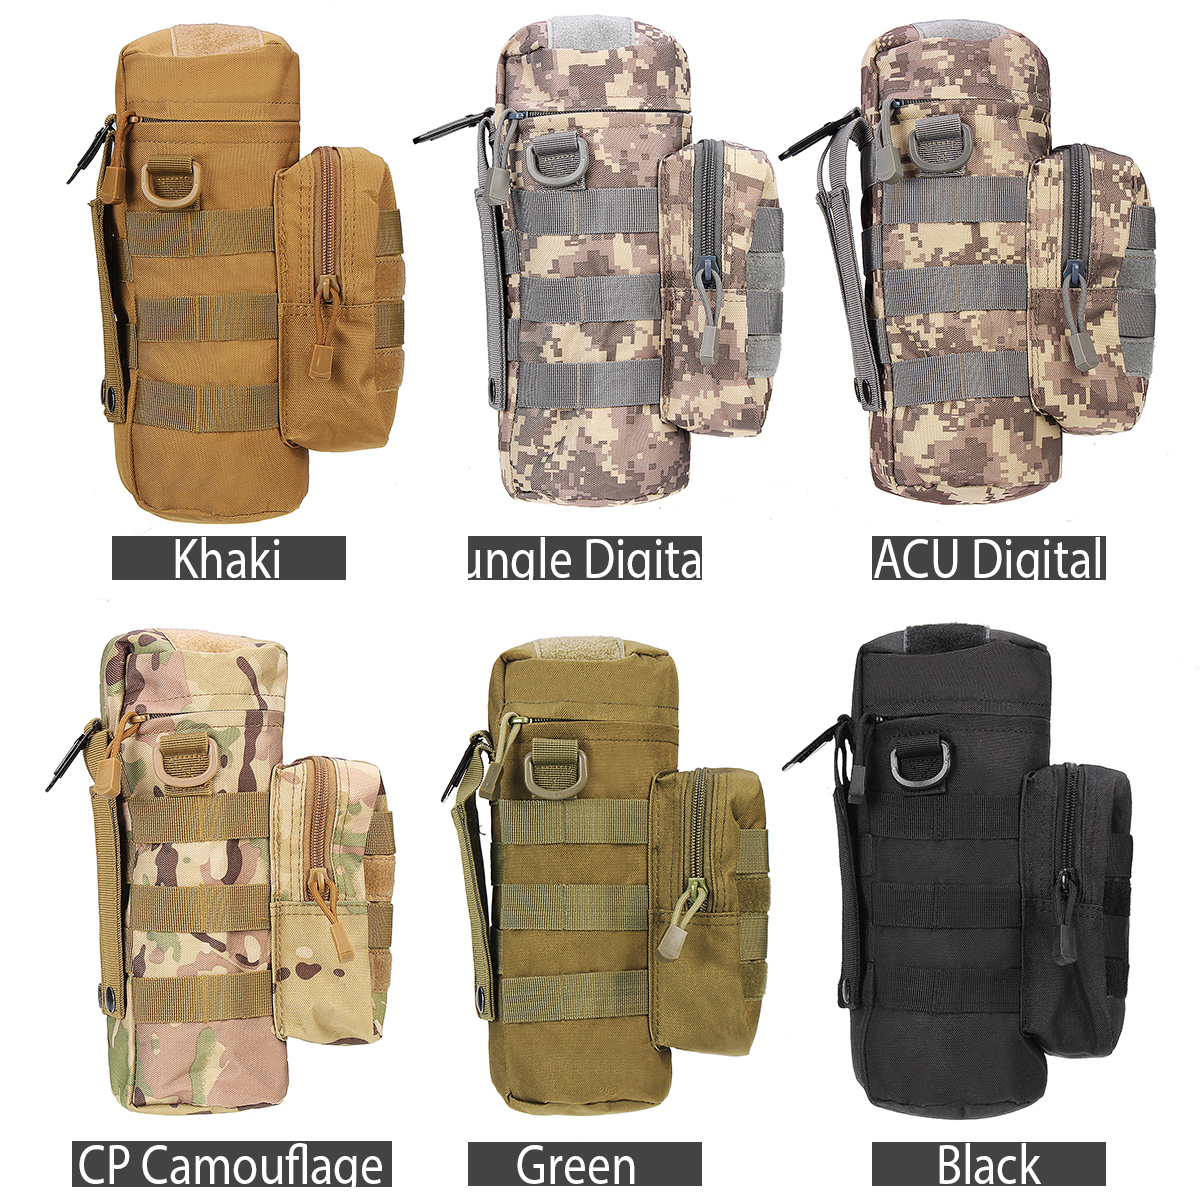 Multifunctional-Water-Bottle-Bag-Outdoor-Tactical-Bag-Sports-Hiking-Climbing-Package-Kettle-Bag-1484982-10